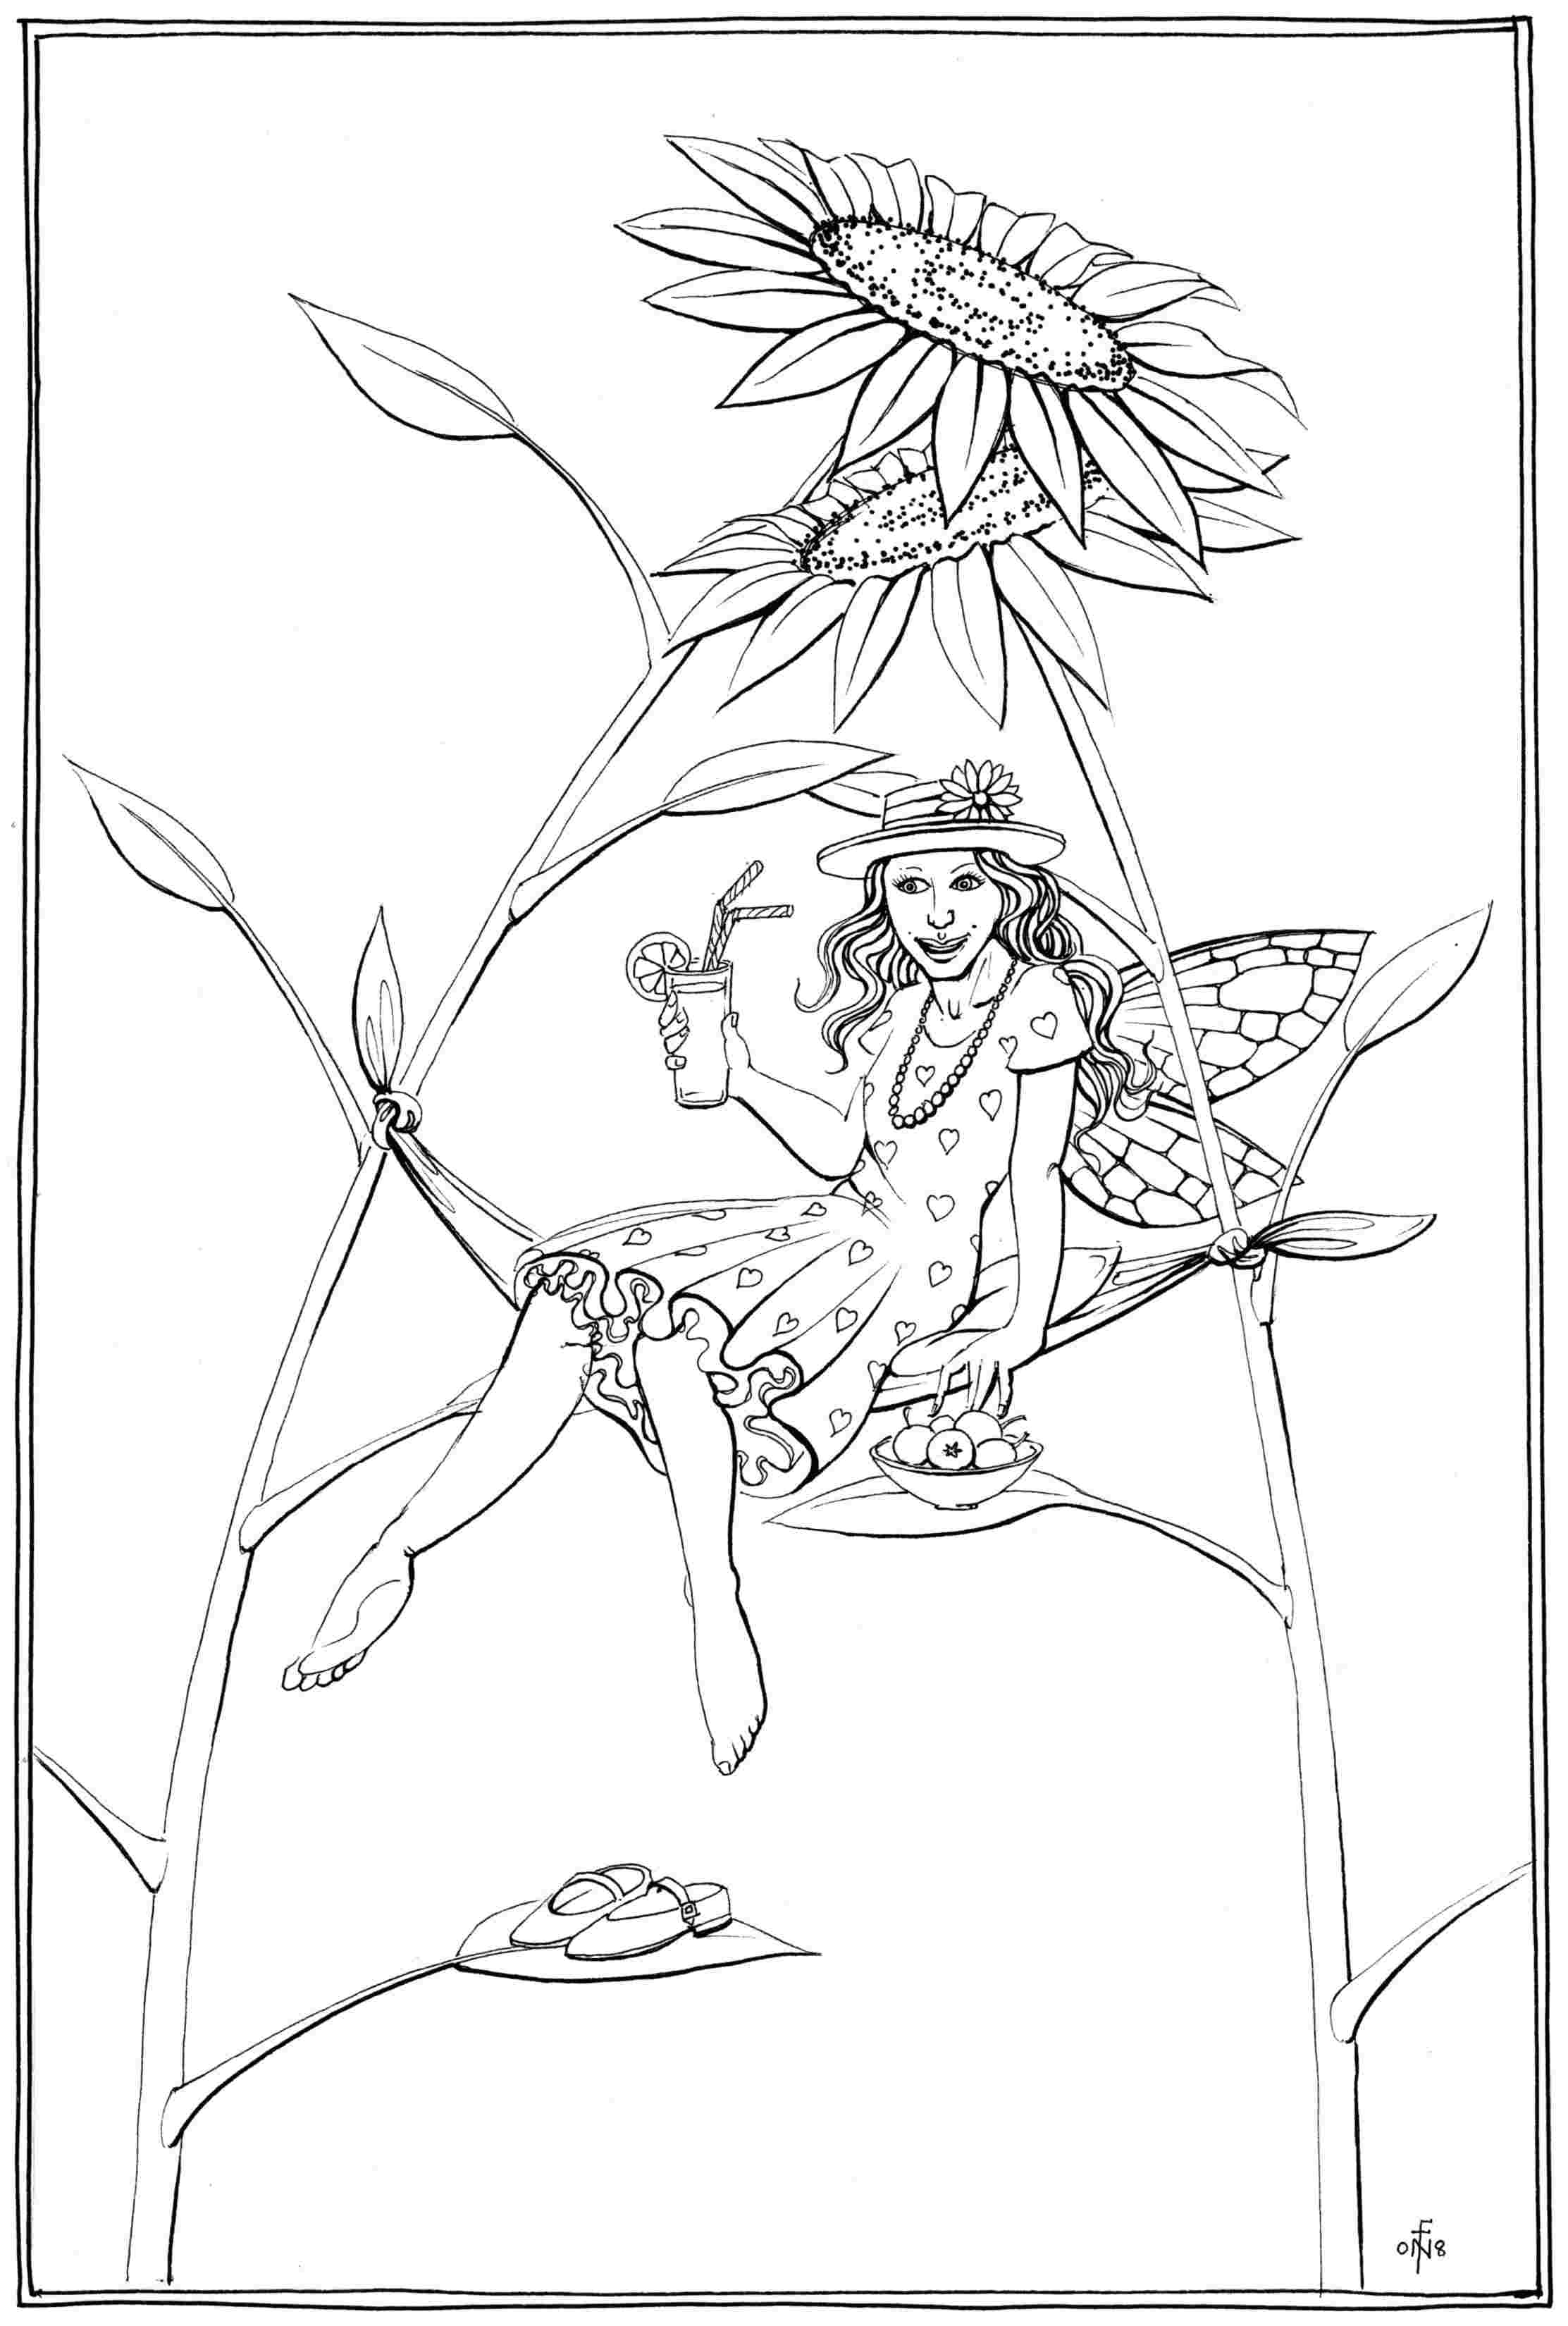 Sunflower Bower - colouring-in drawing - to download, right click and save, print out and colour in!